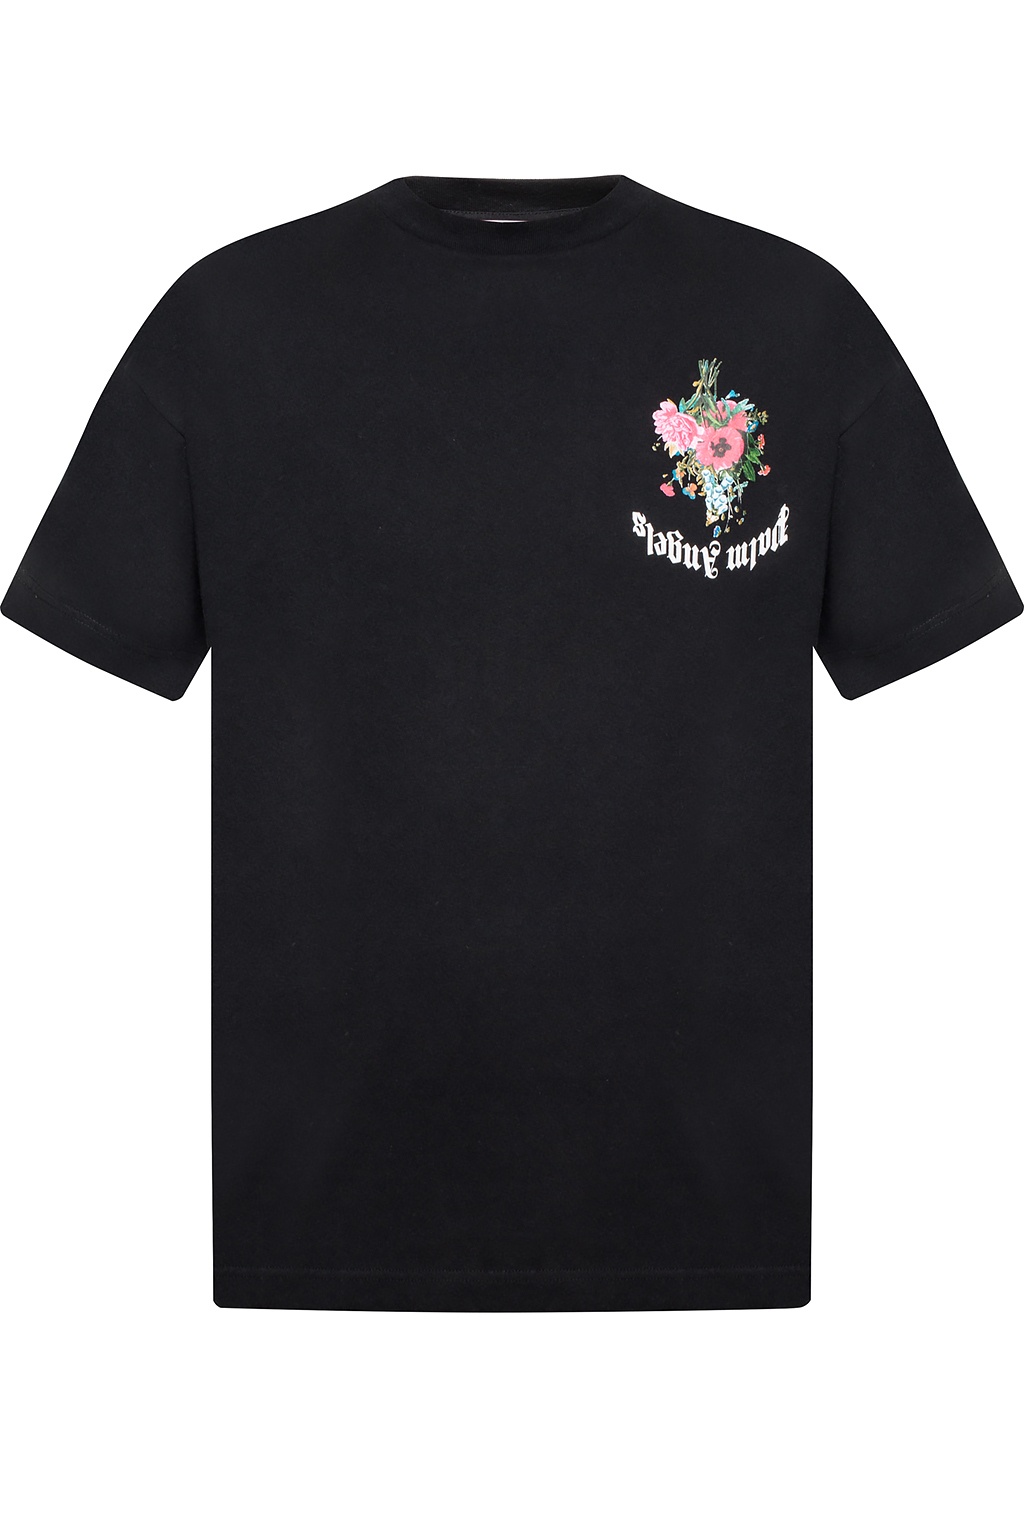 MULTICOLOR LOGO T-SHIRT in black - Palm Angels® Official